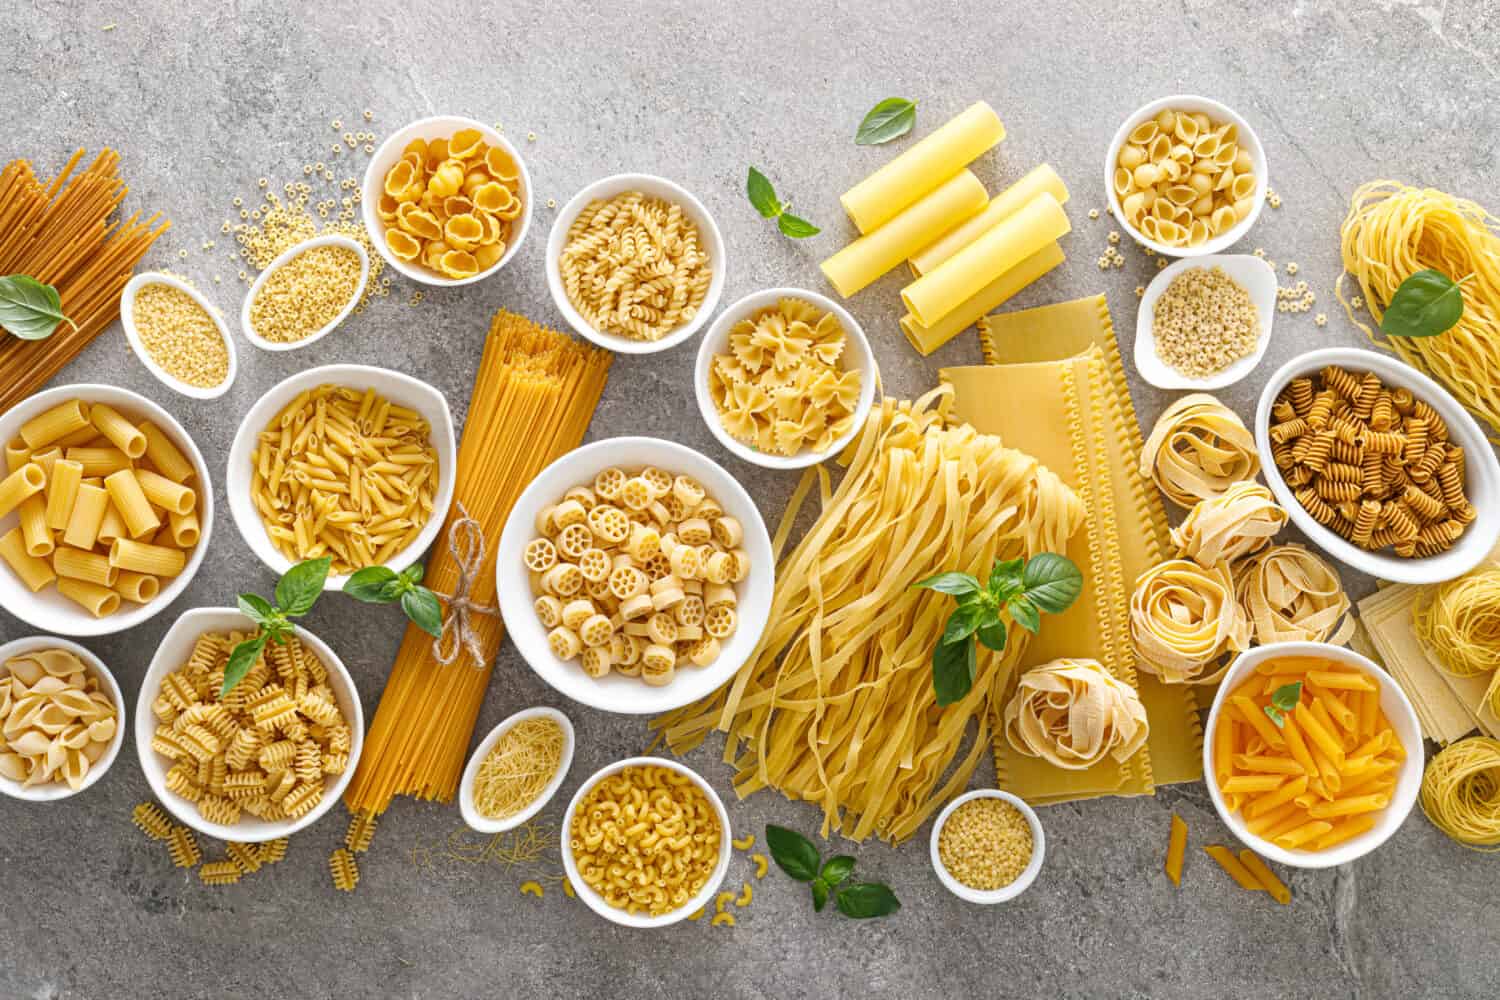 Gluten-Free Pasta. Various kinds of uncooked pasta and noodles over stone background, top view with copy space for text. Italian food culinary concept. Collection of different raw pasta on cooking table